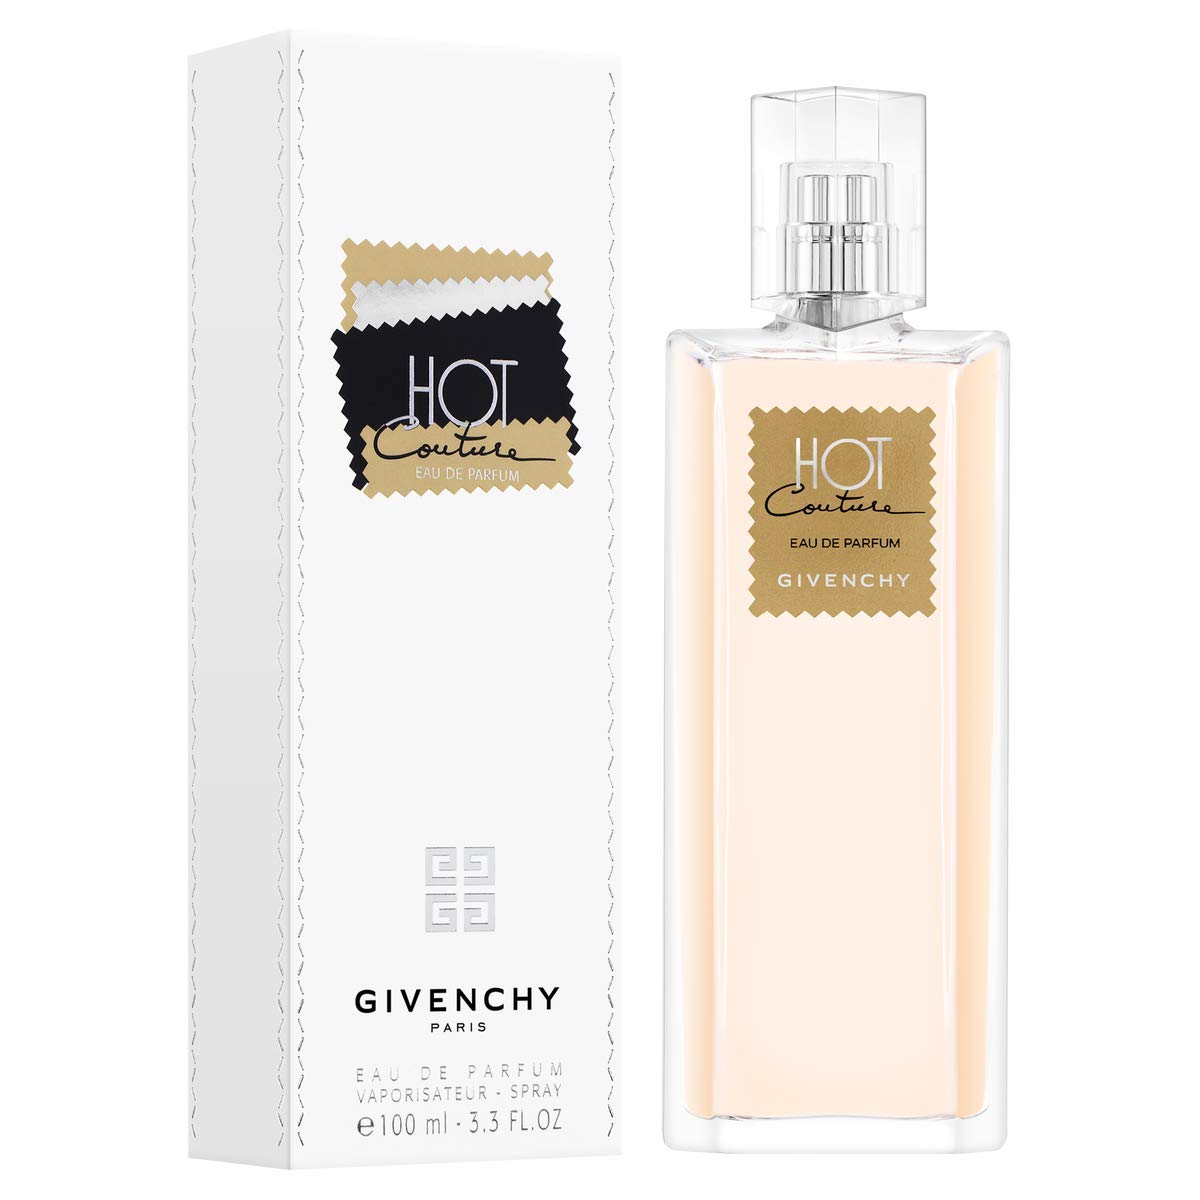 Couture туалетная вода. Живанши хот Кутюр. Живанши духи женские hot Couture. Givenchy hot Couture Eau de Toilette 100 мл. Givenchy hot Couture (l) EDP 100ml.